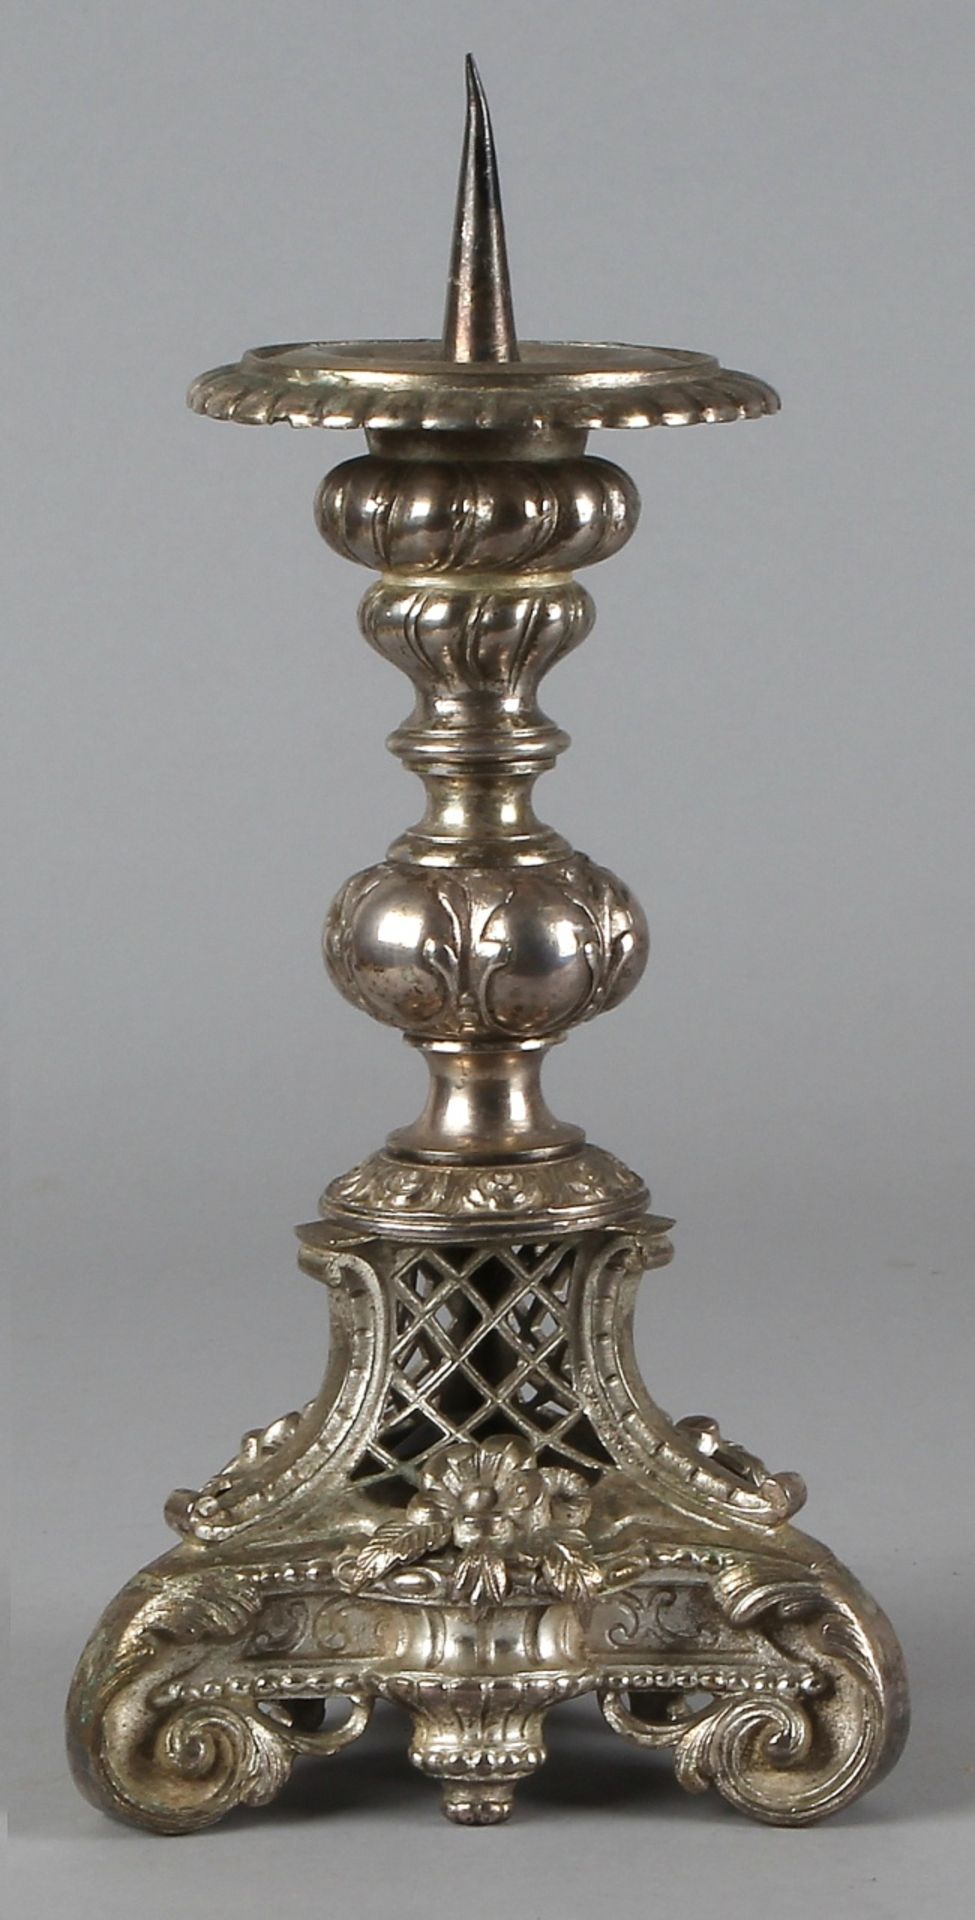 Nineteenth century silvered bronze candle candlesticks in Baroque style with floral decor, good